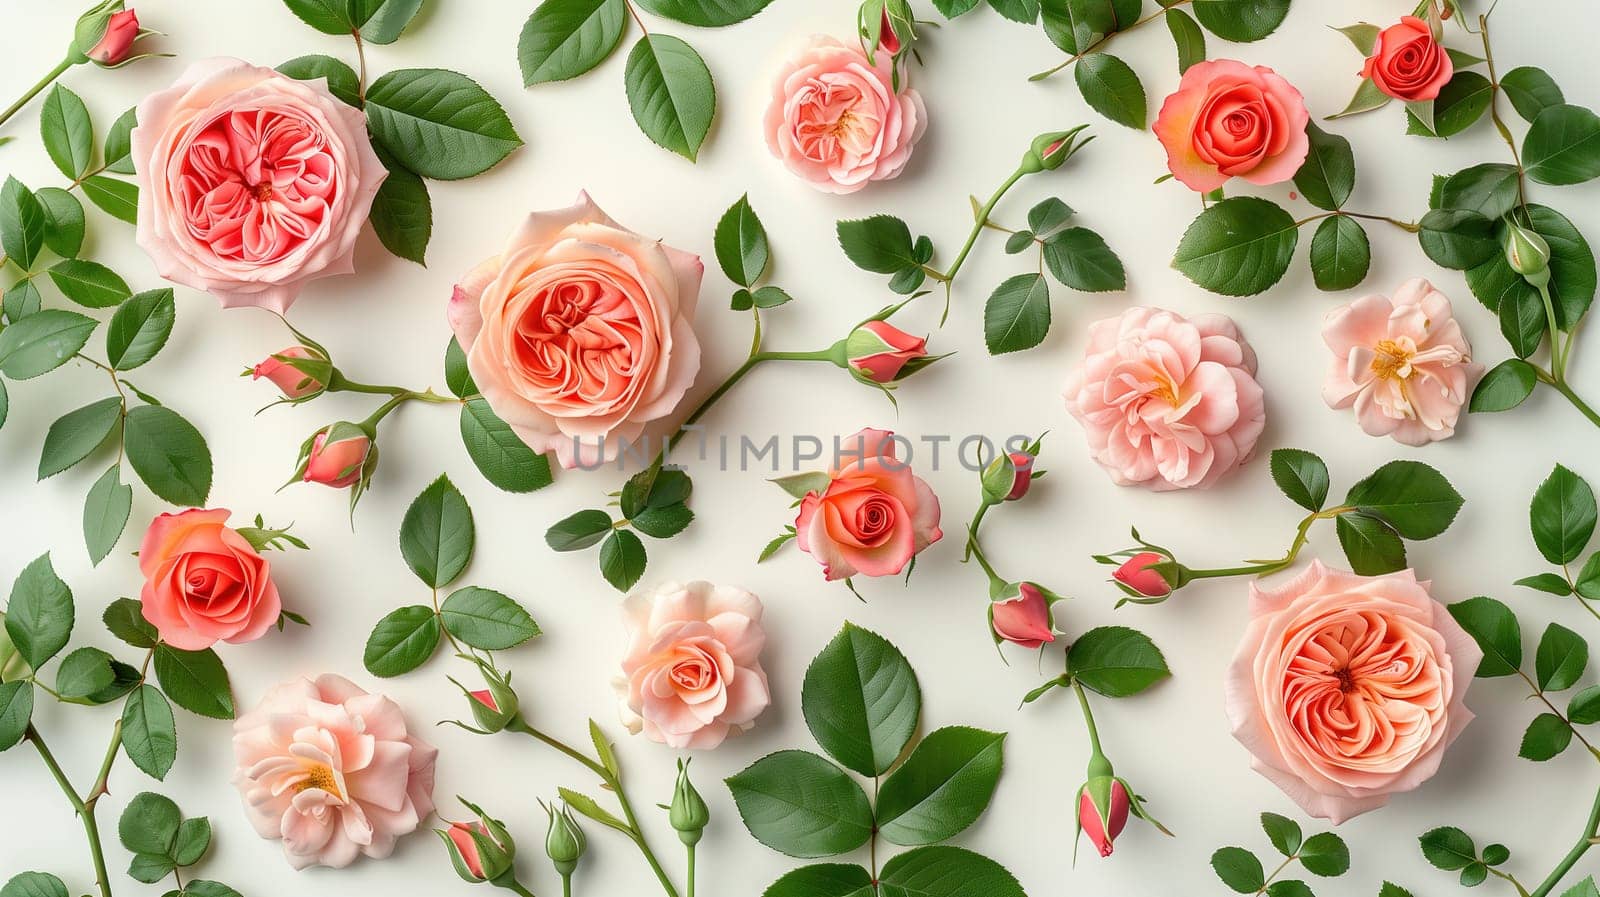 A collection of pink roses arranged on a plain white surface, showcasing the beauty of the delicate flowers in full bloom.